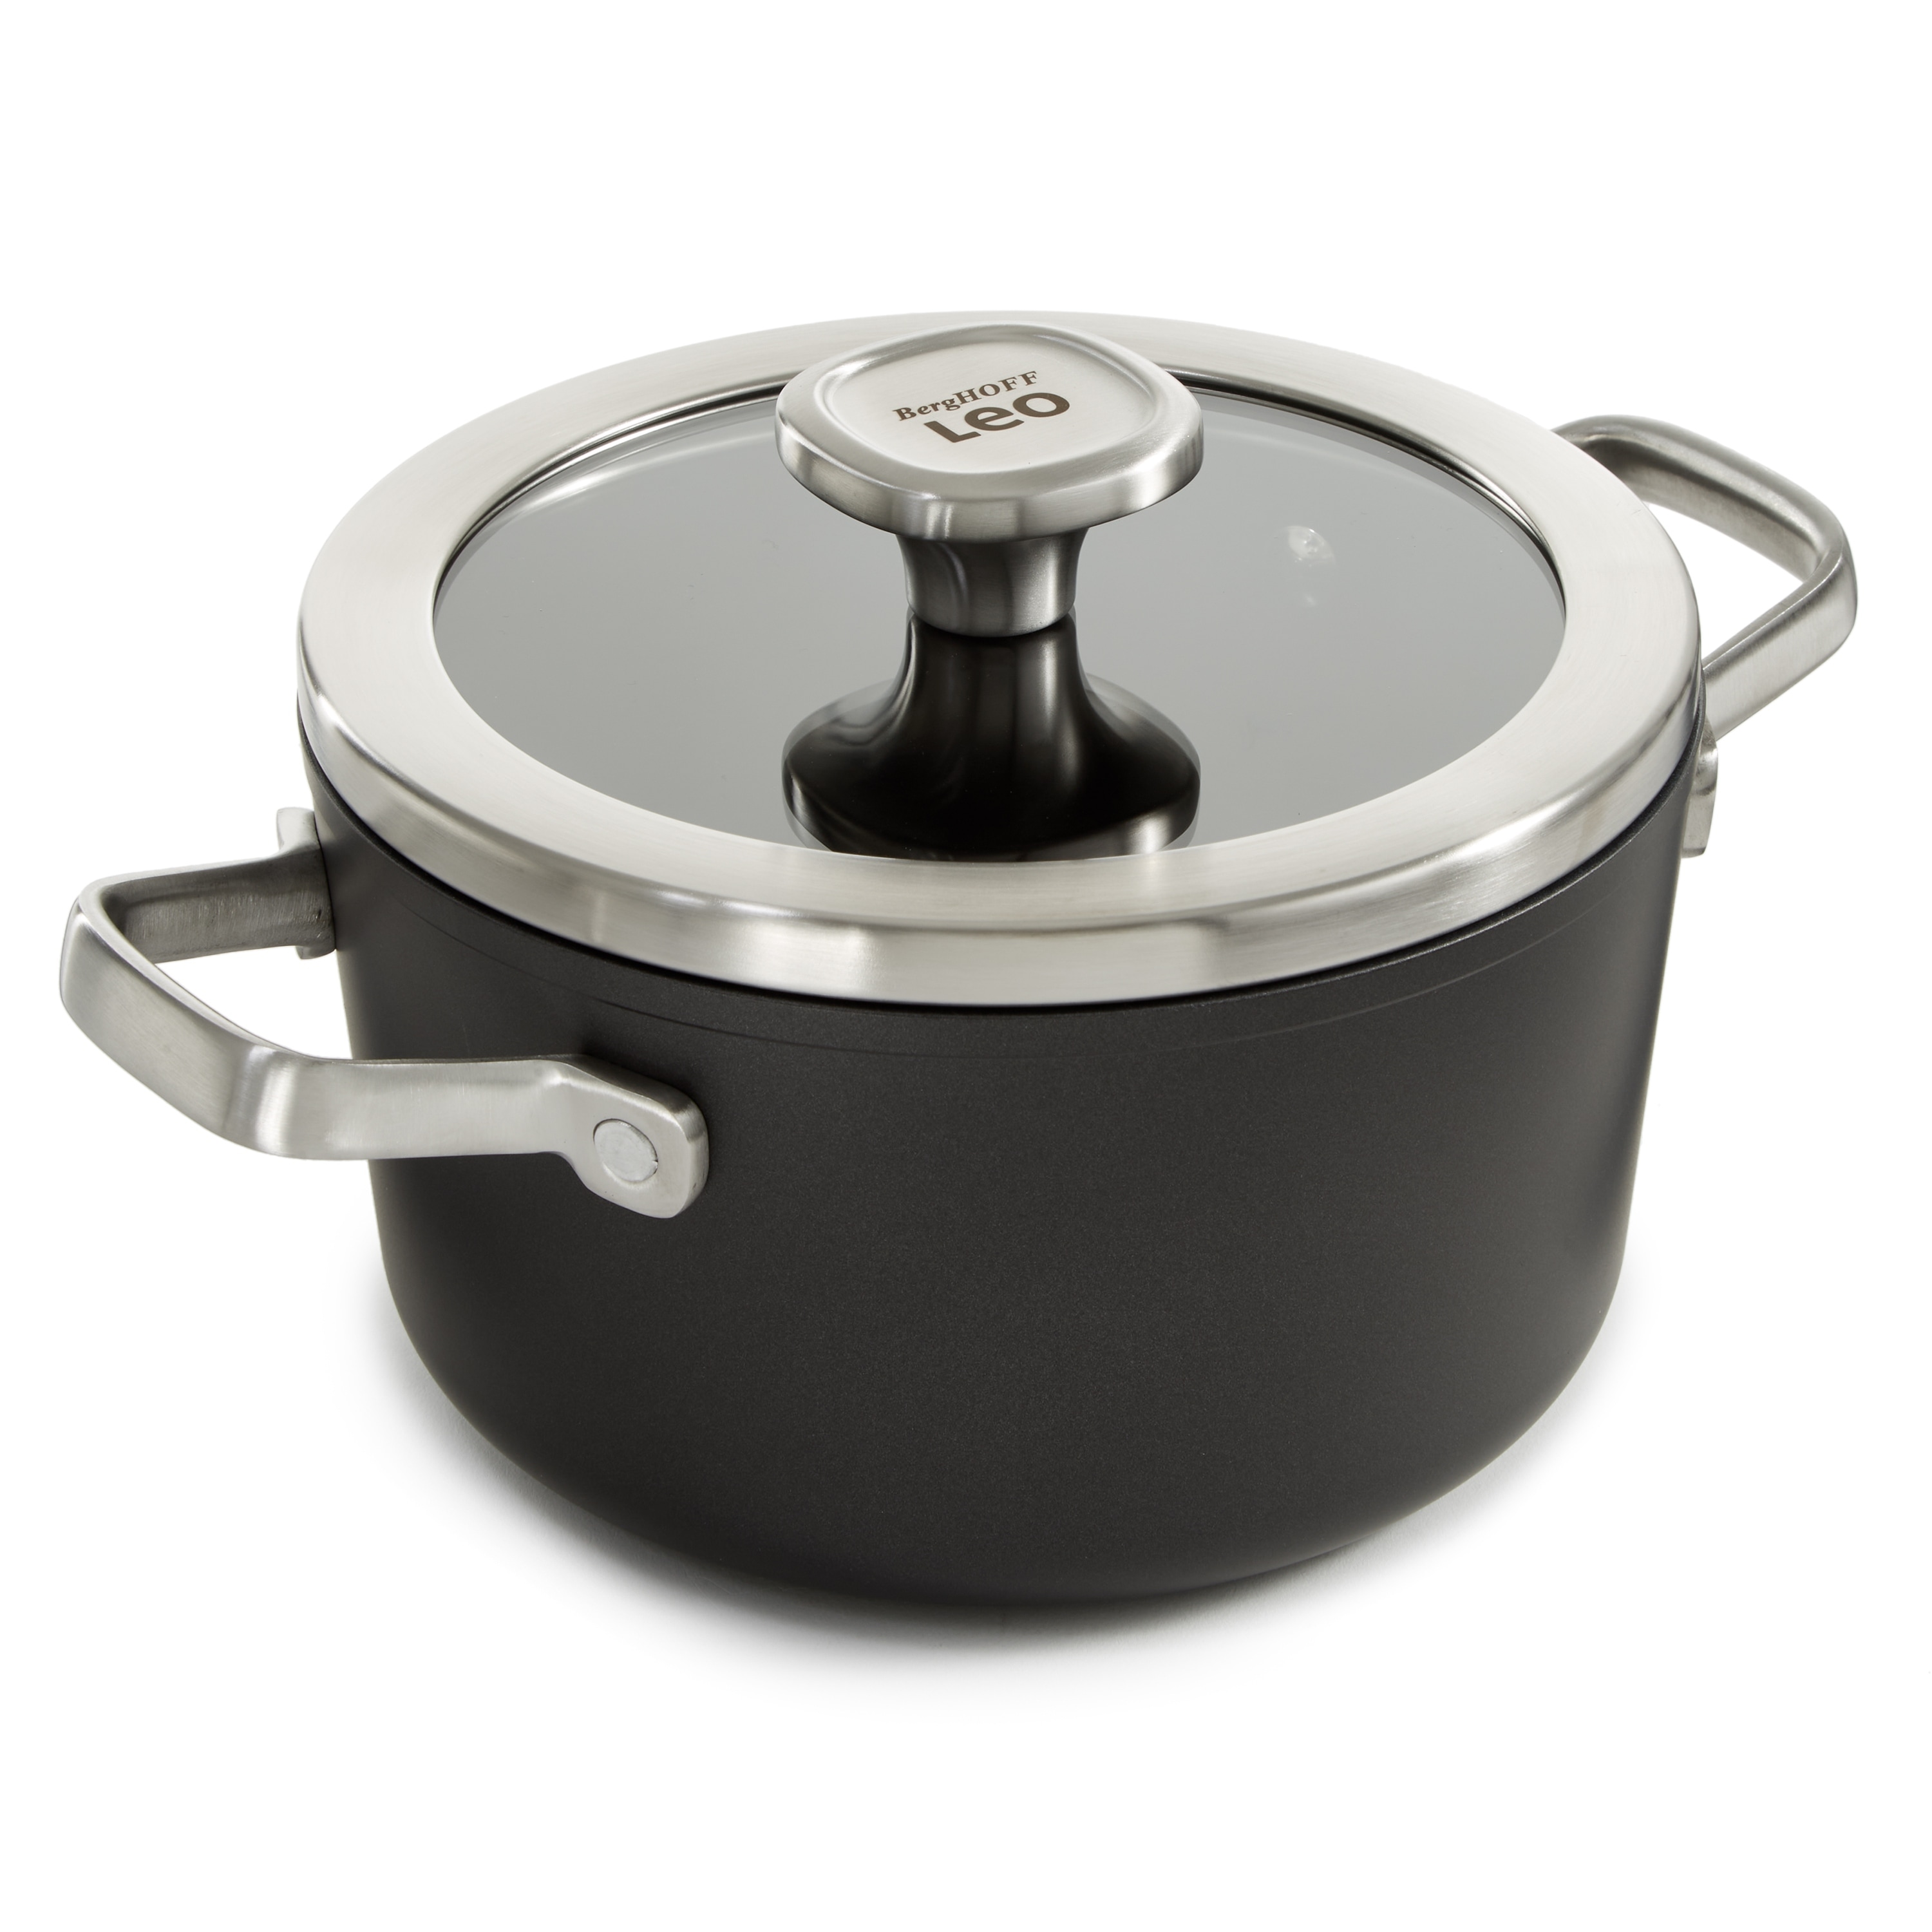 https://ak1.ostkcdn.com/images/products/is/images/direct/c6c9fe150fbec2cb4f28fafc3ce2ca9e4b579246/BergHOFF-Graphite-Non-stick-Ceramic-Stockpot-8%22%2C-3.3qt.-With-Glass-Lid%2C-Sustainable-Recycled-Material.jpg